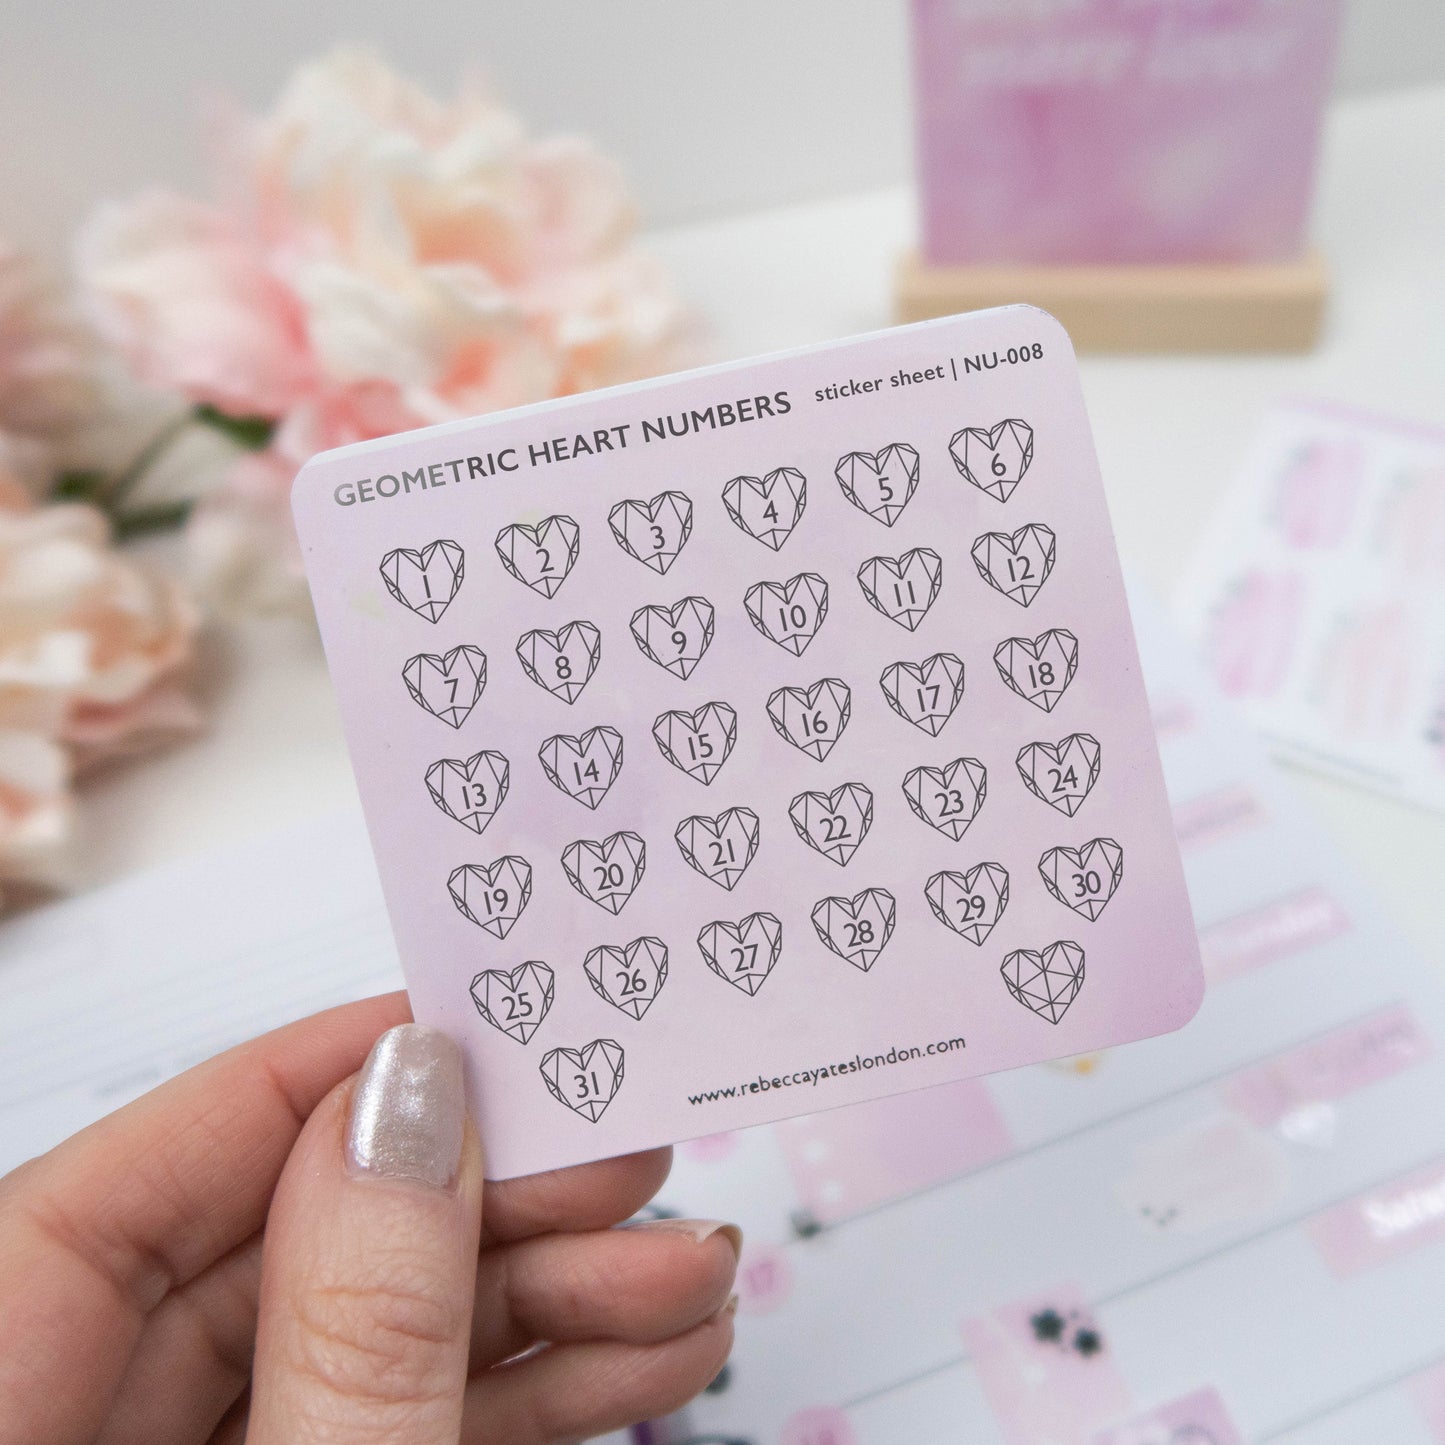 GEOMETRIC HEART NUMBERS - FOILED PLANNER STICKERS